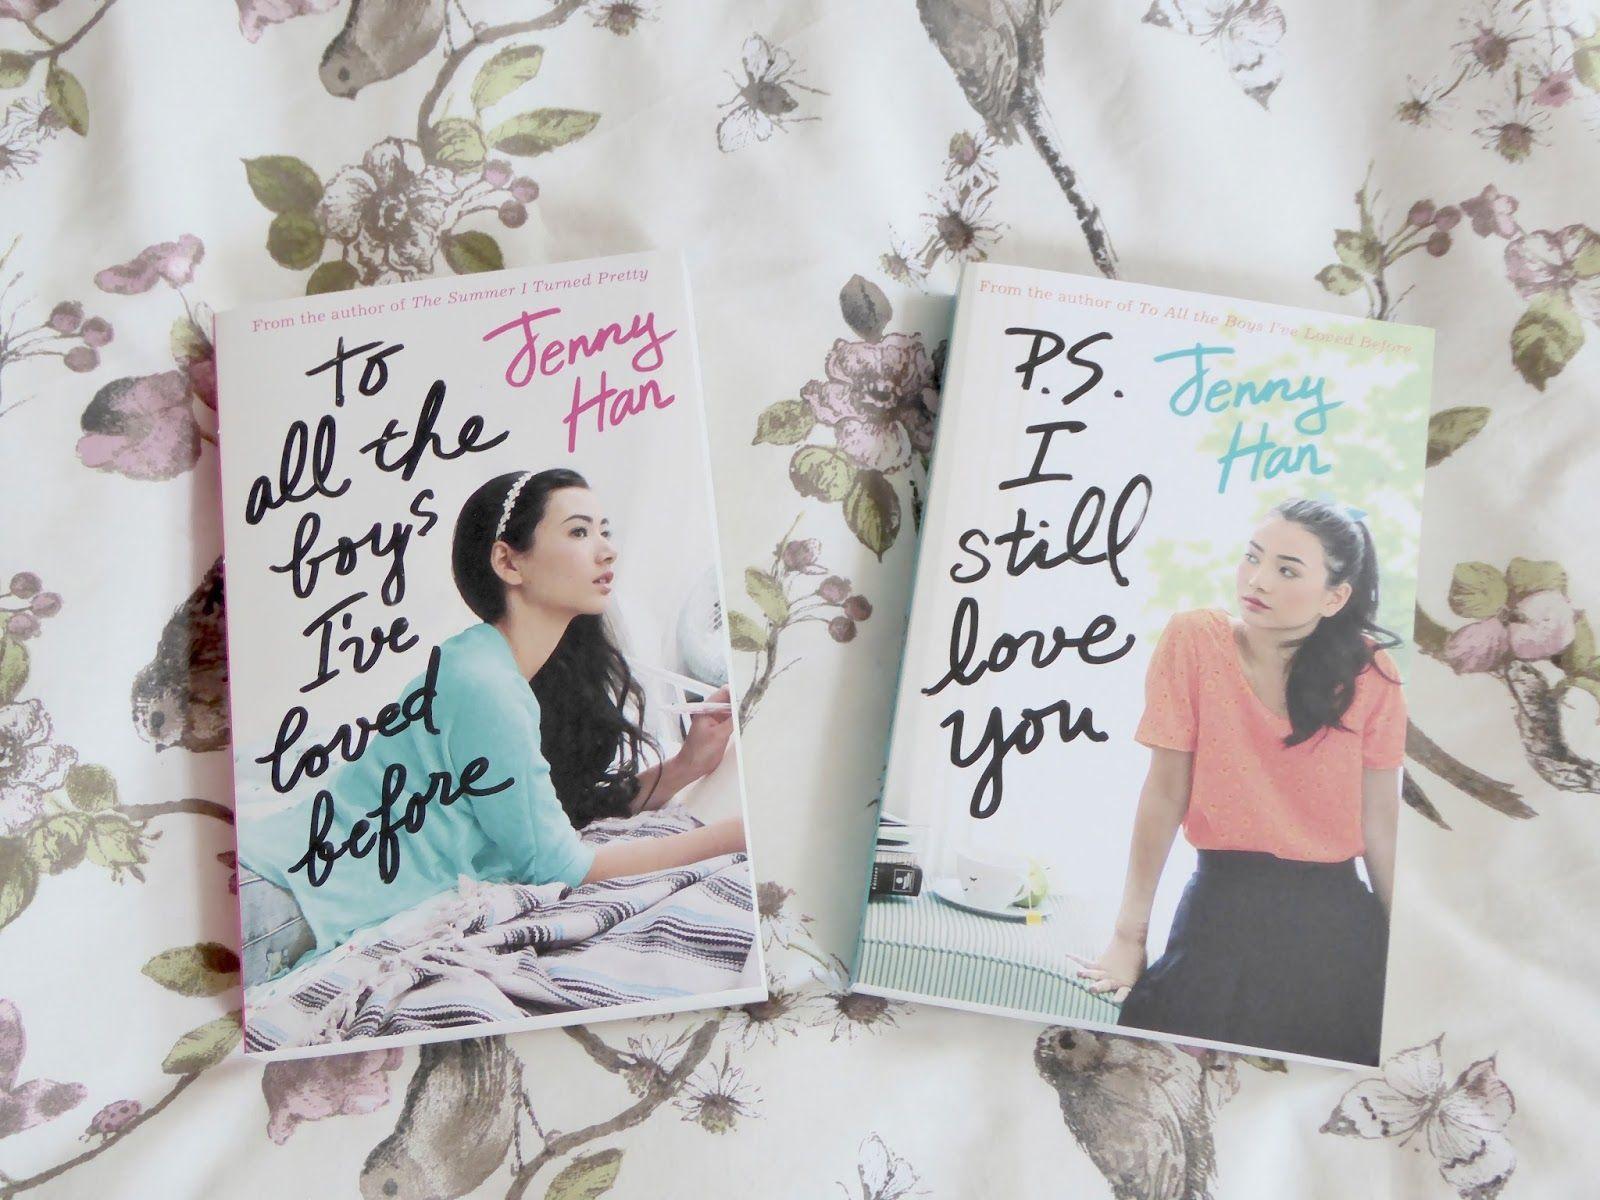 Book Review: To All The Boys I've Loved Before and PS. I Still